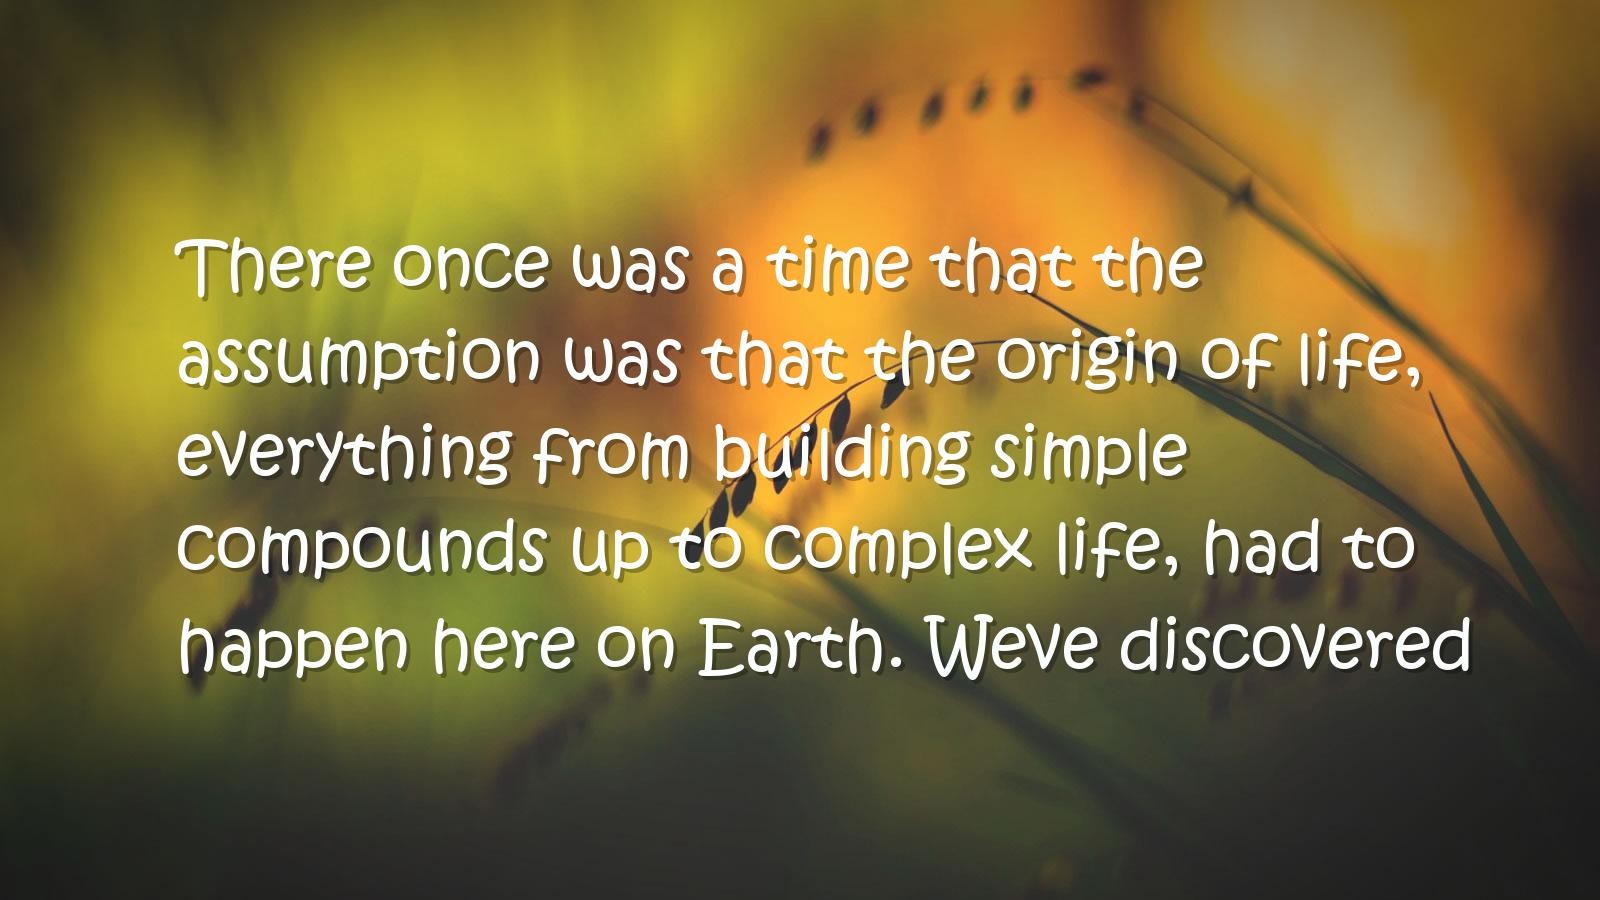 There once was a time that the assumption was that the origin of life, everything from building ..